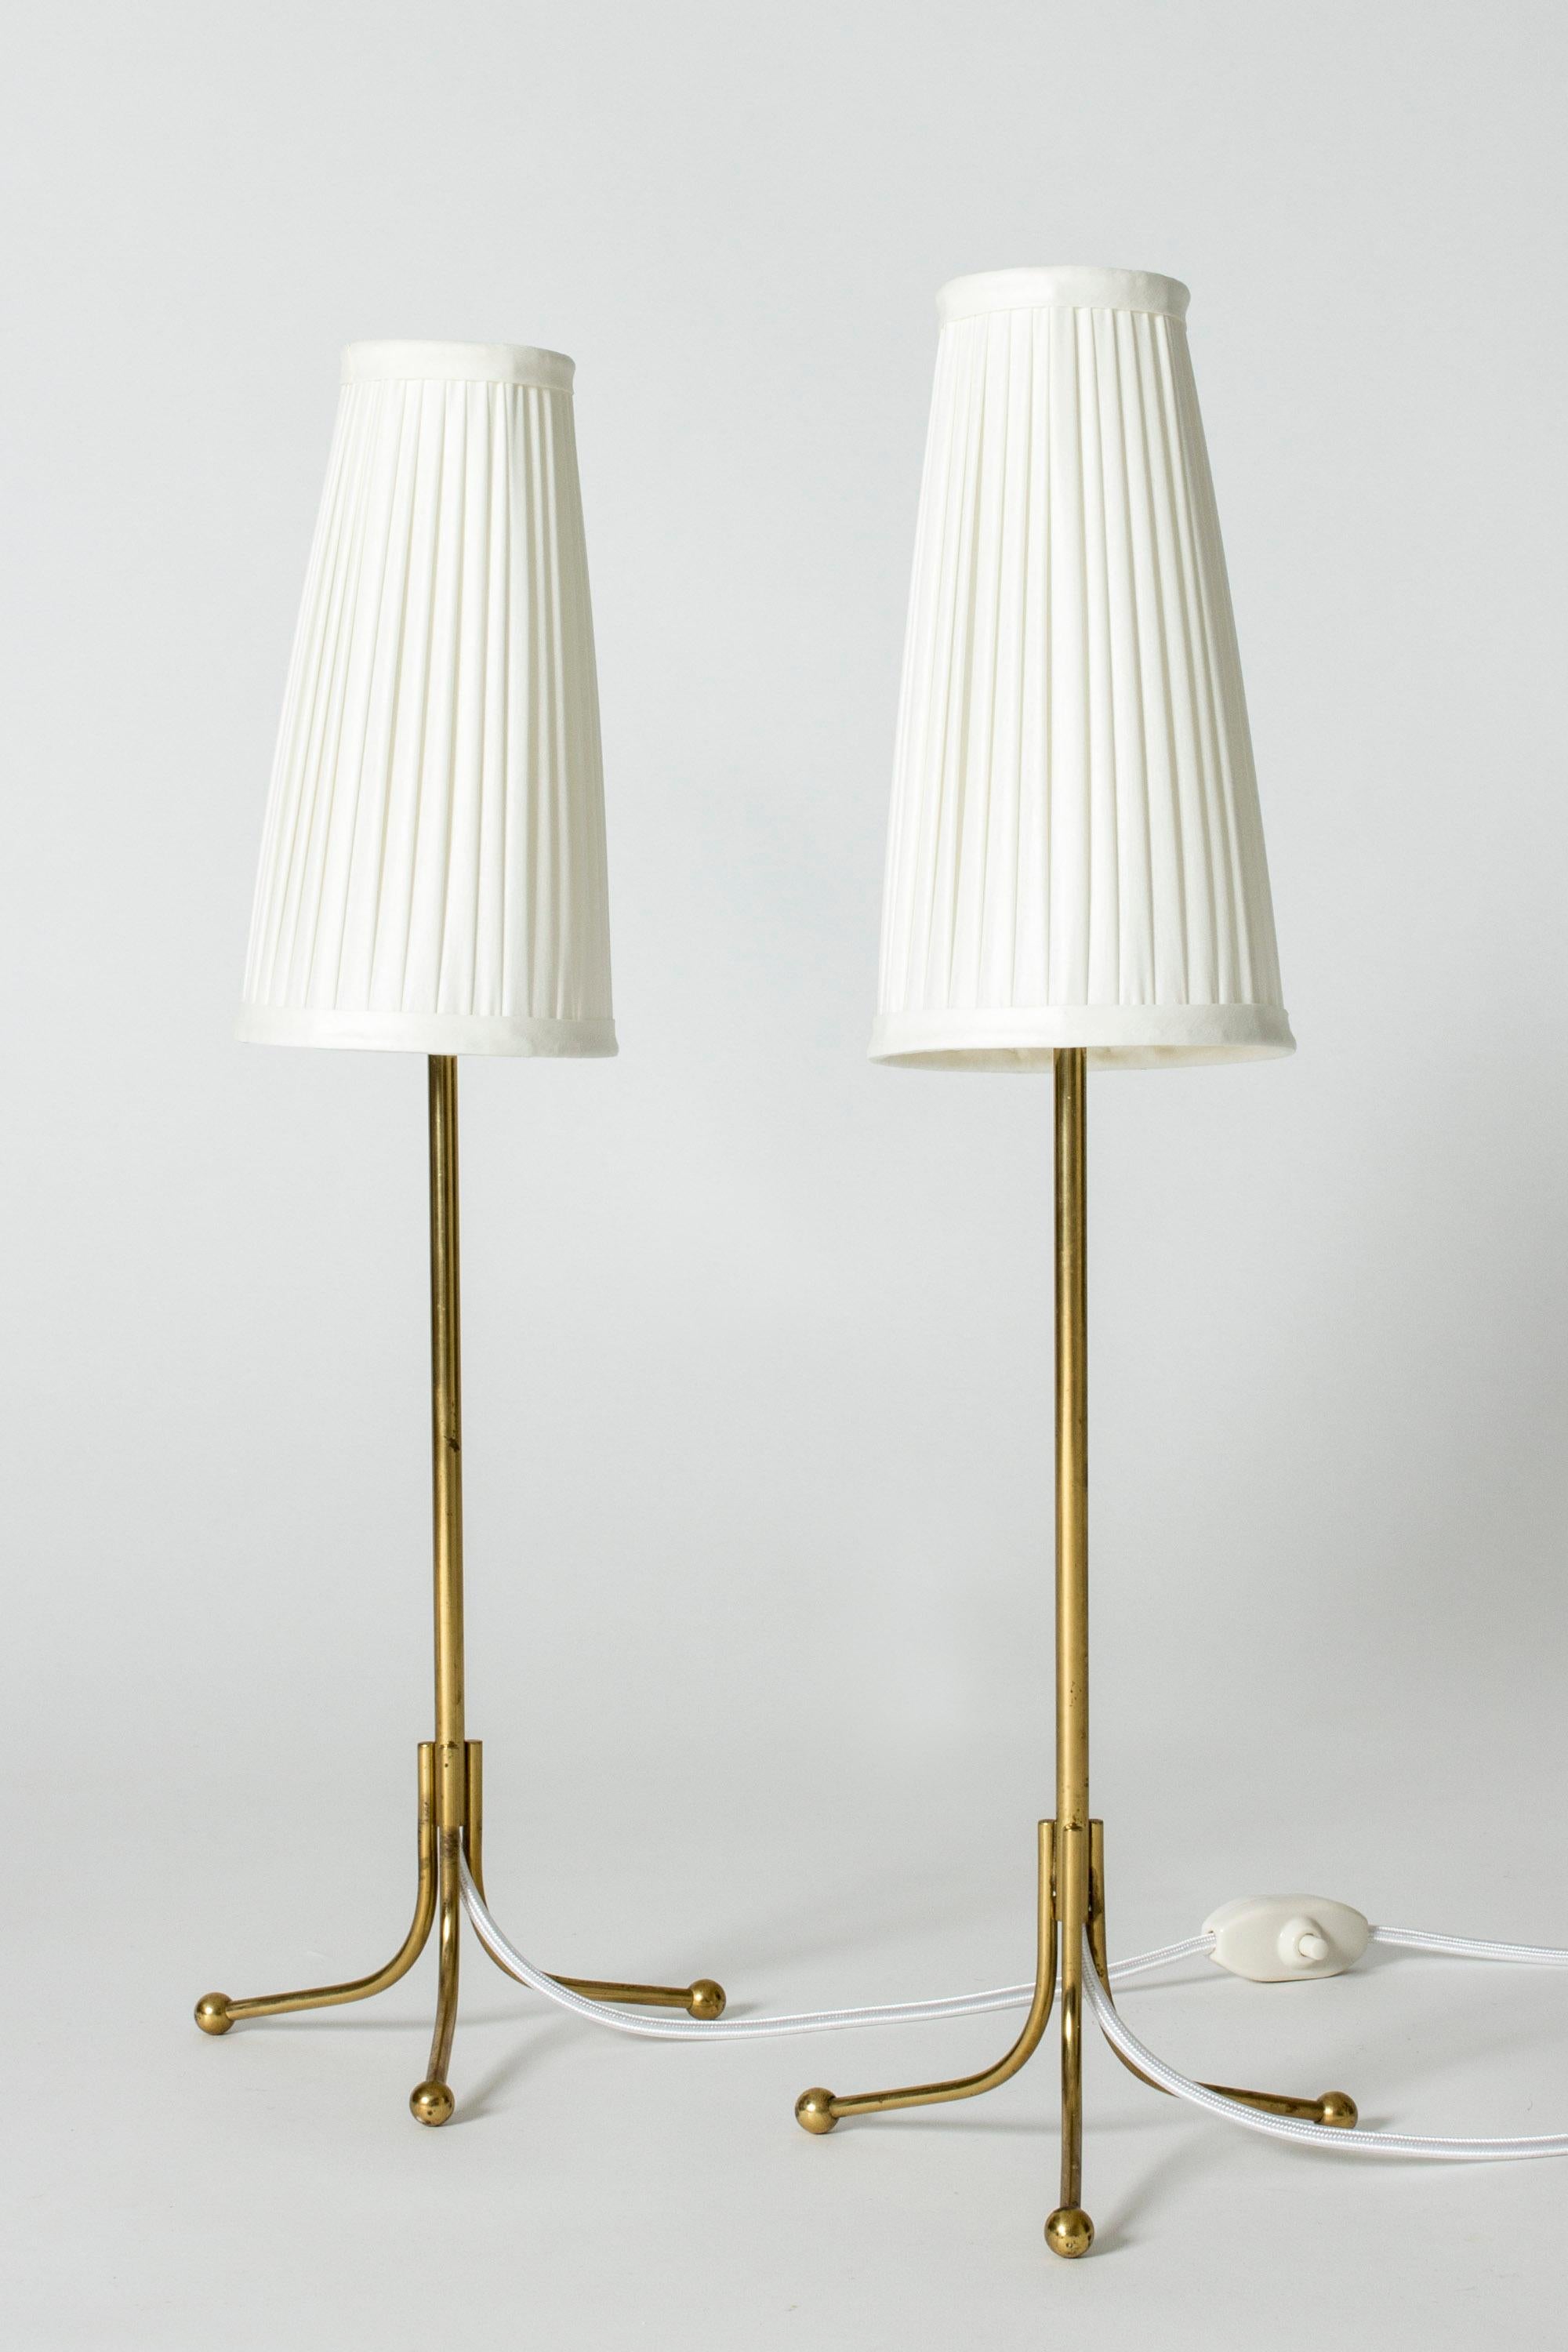 Pair of beautiful, rare table lamps by Josef Frank. Early model, made from brass in a slender, elegant design.